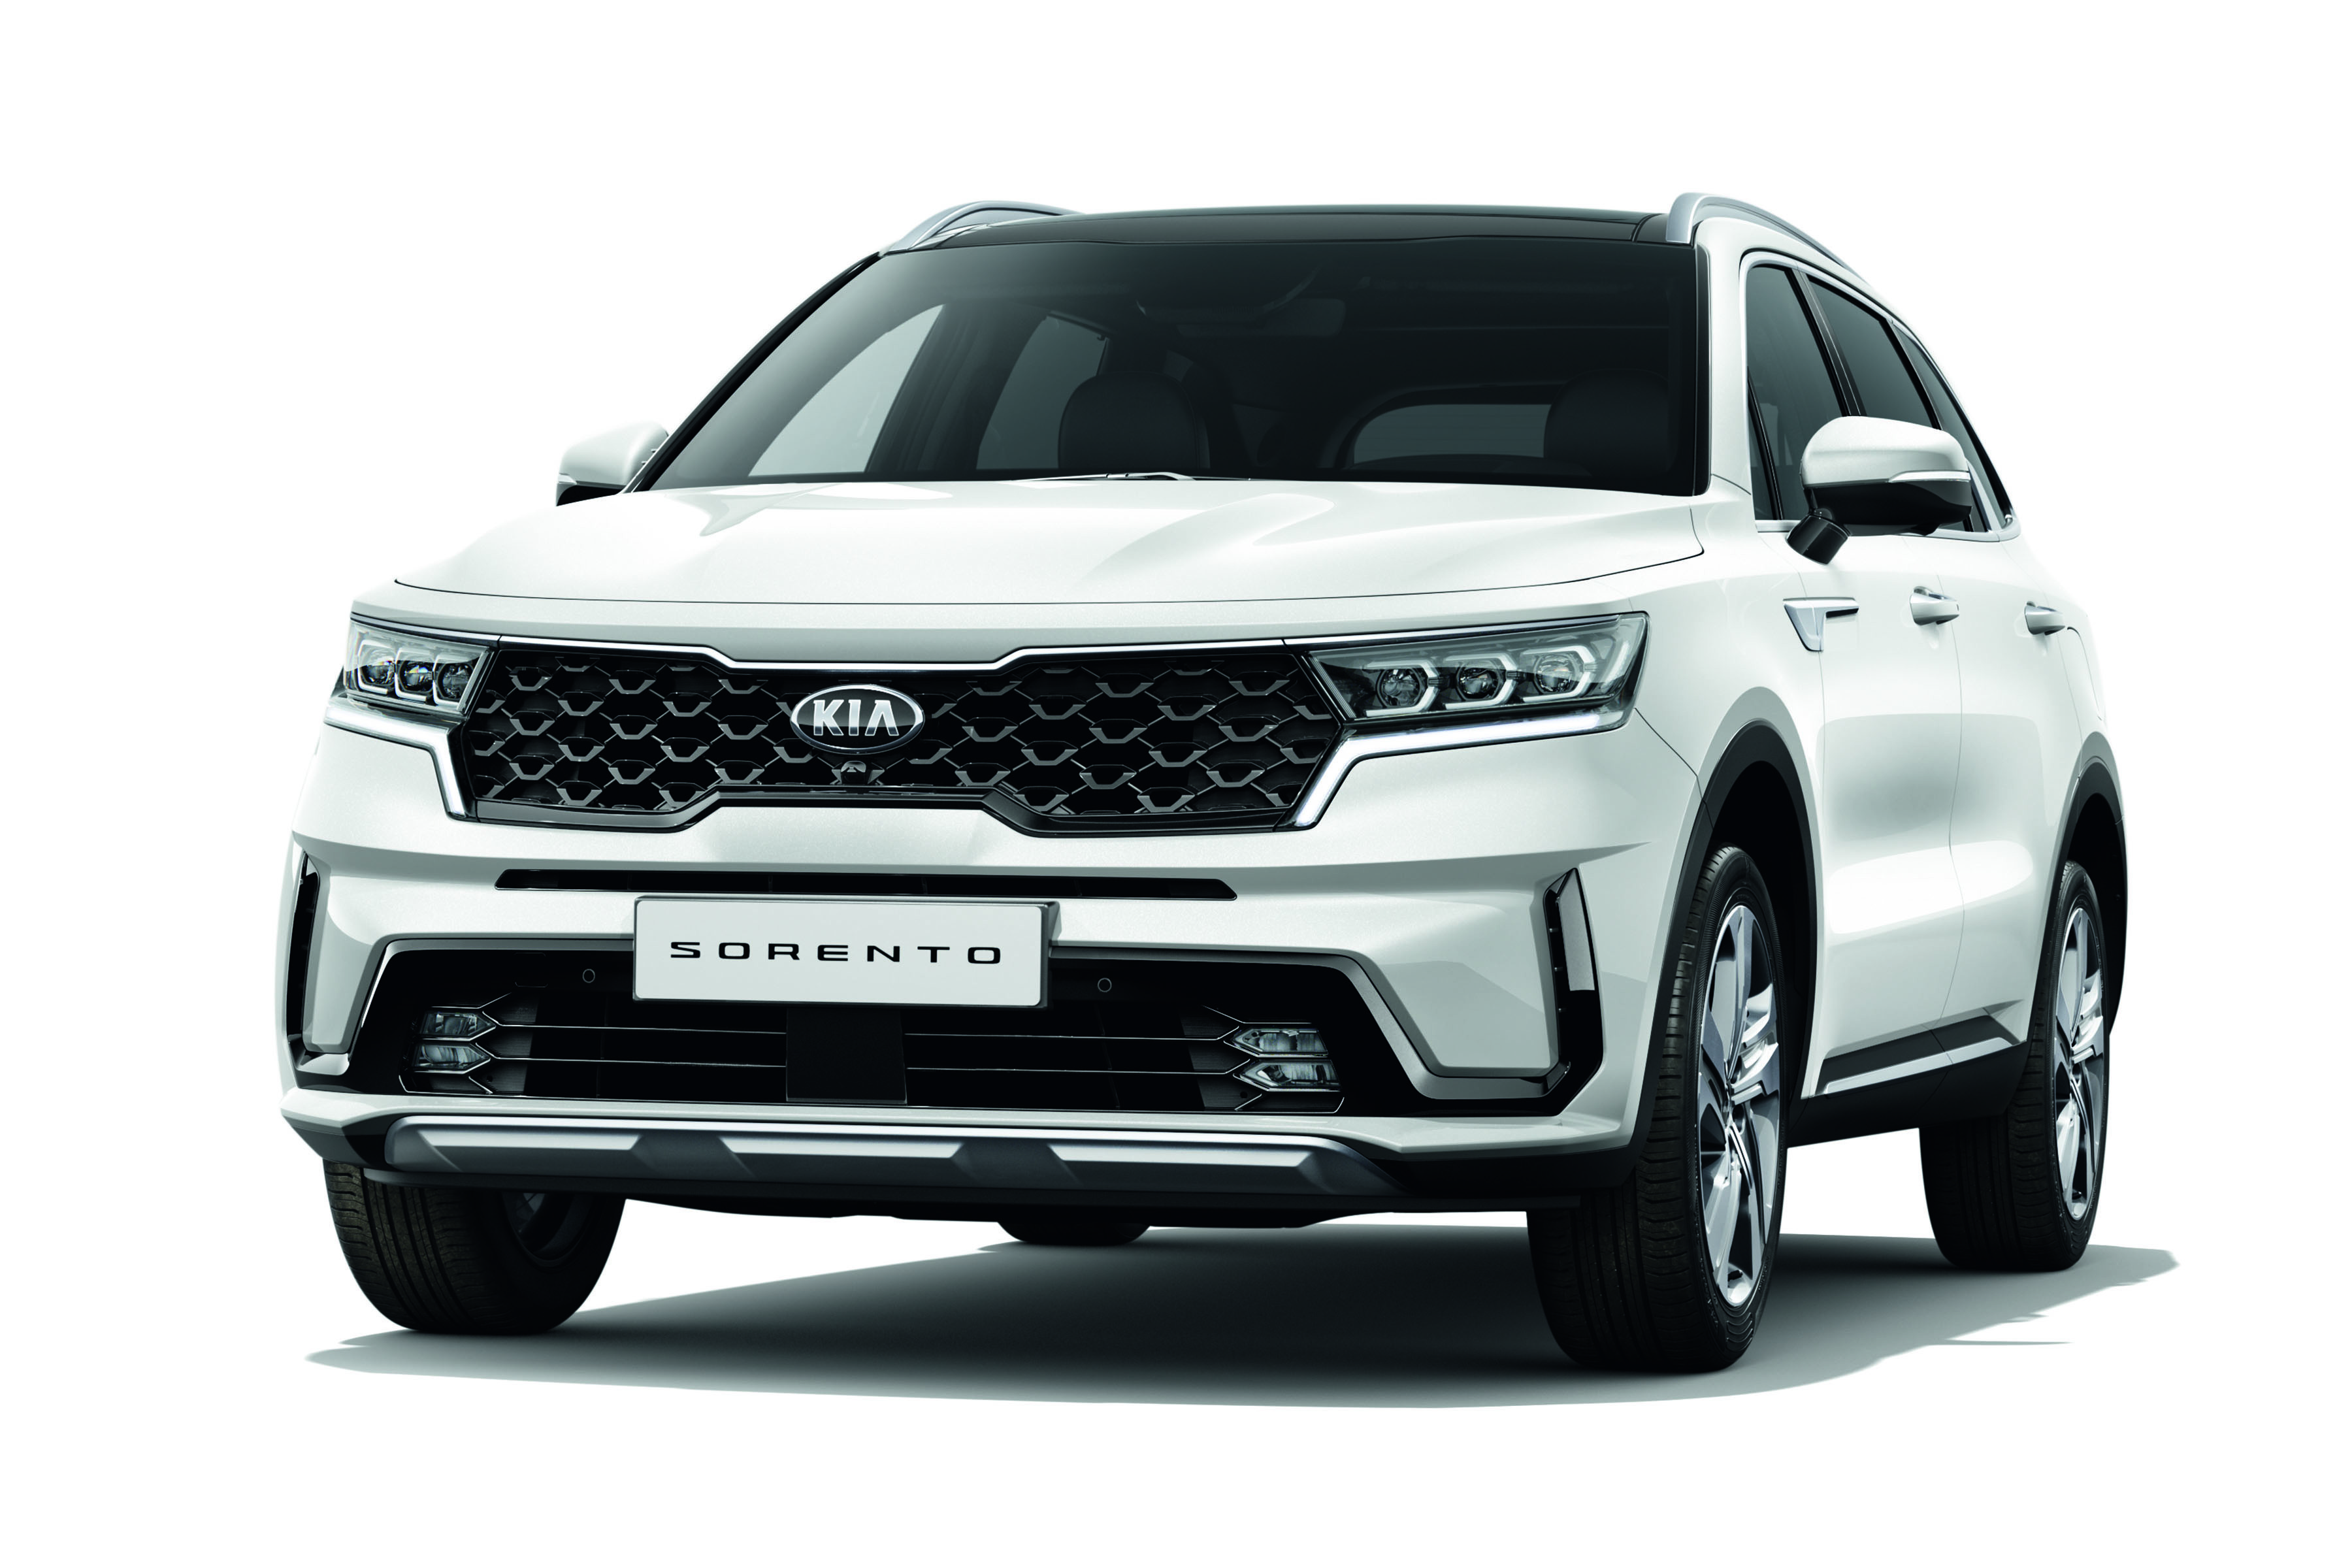 https://s1.cdn.autoevolution.com/images/news/gallery/2021-kia-sorento-mq4-revealed-with-refined-boldness-will-premiere-next-month_6.jpg